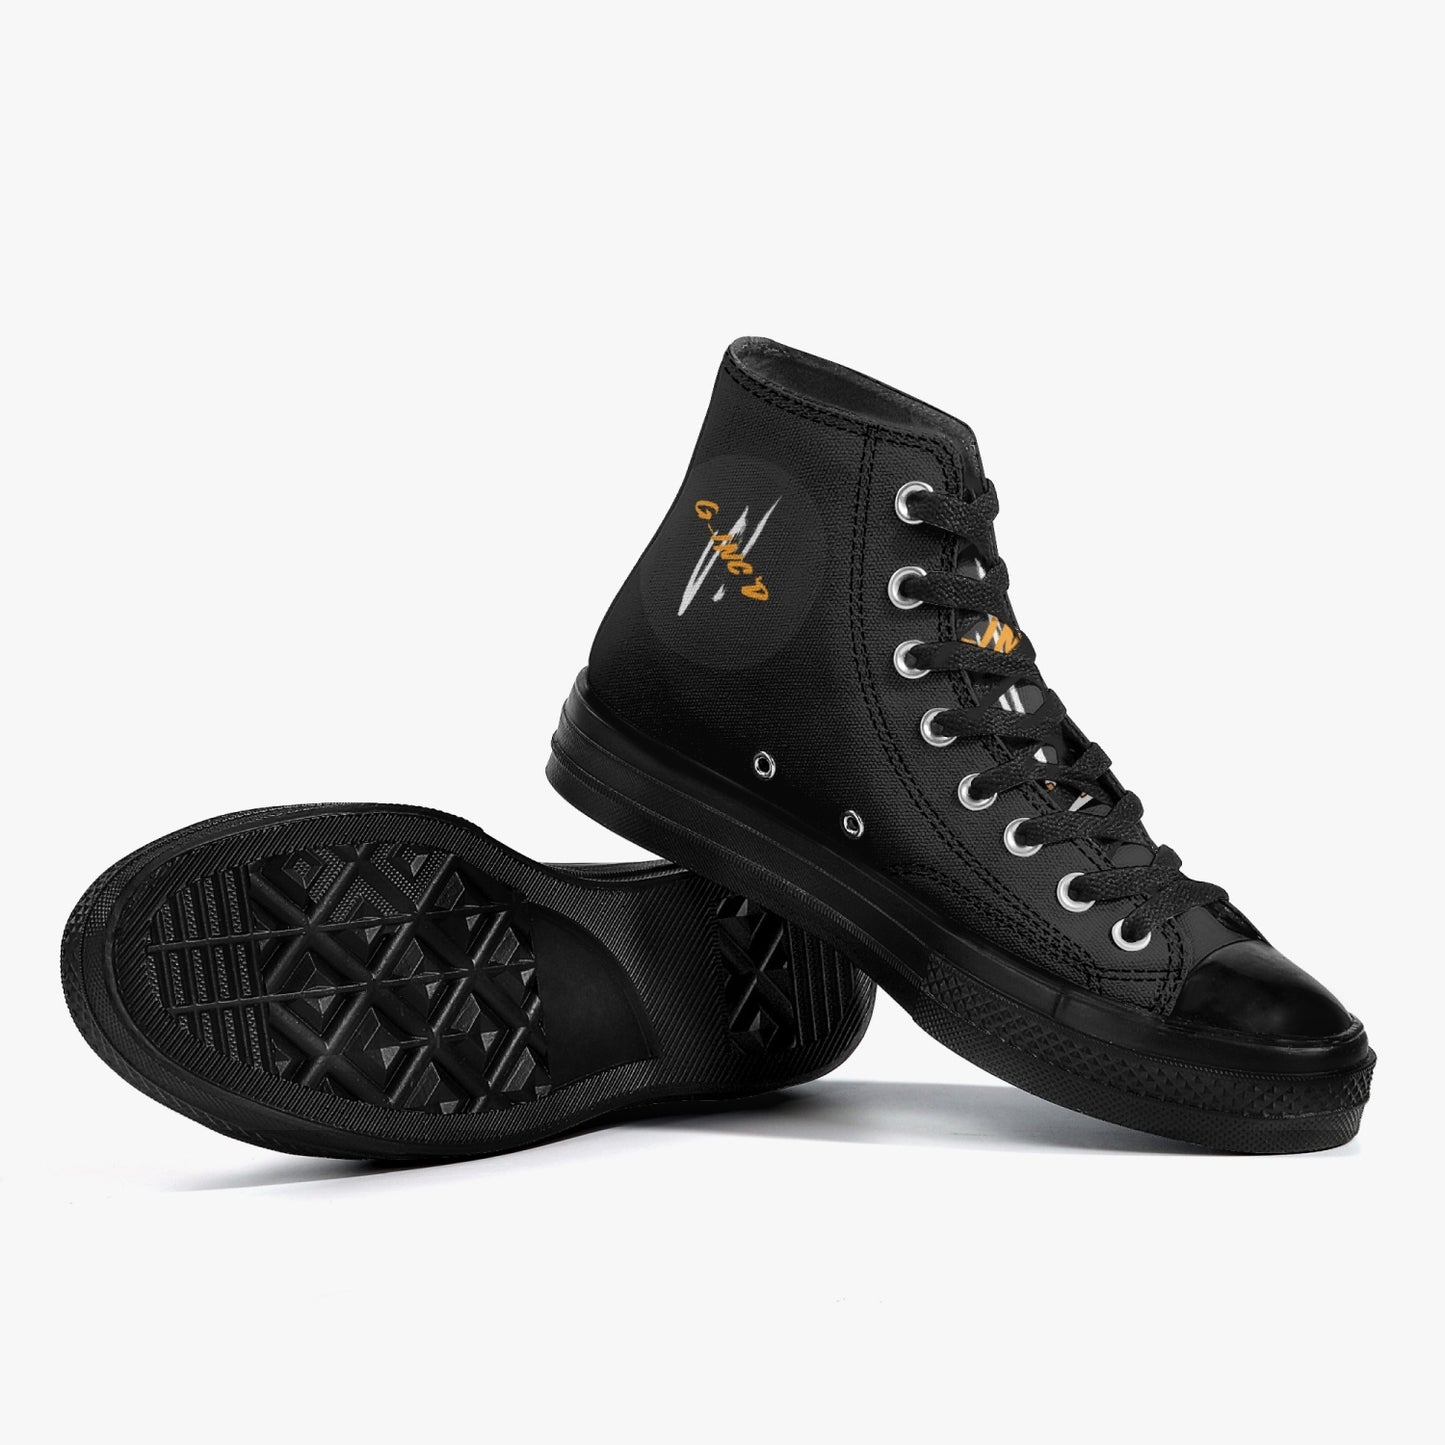 Unisex New High-Top Canvas Shoes - Black